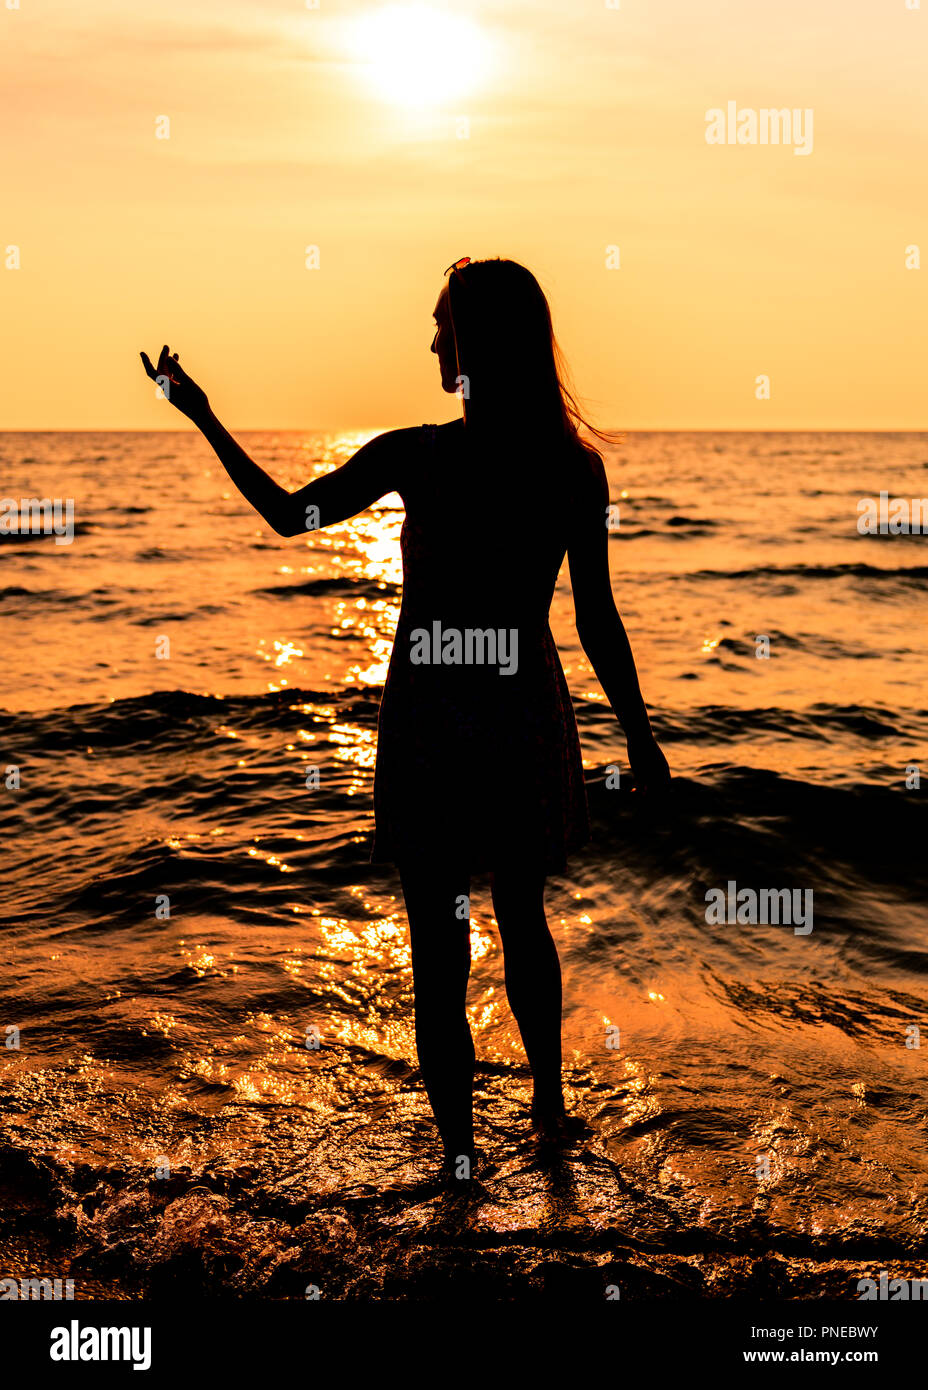 Teen Girl In A Dress With Long Hair At The Beach In Silhouette During Sunset With Her Hand Extended To The Side Stock Photo